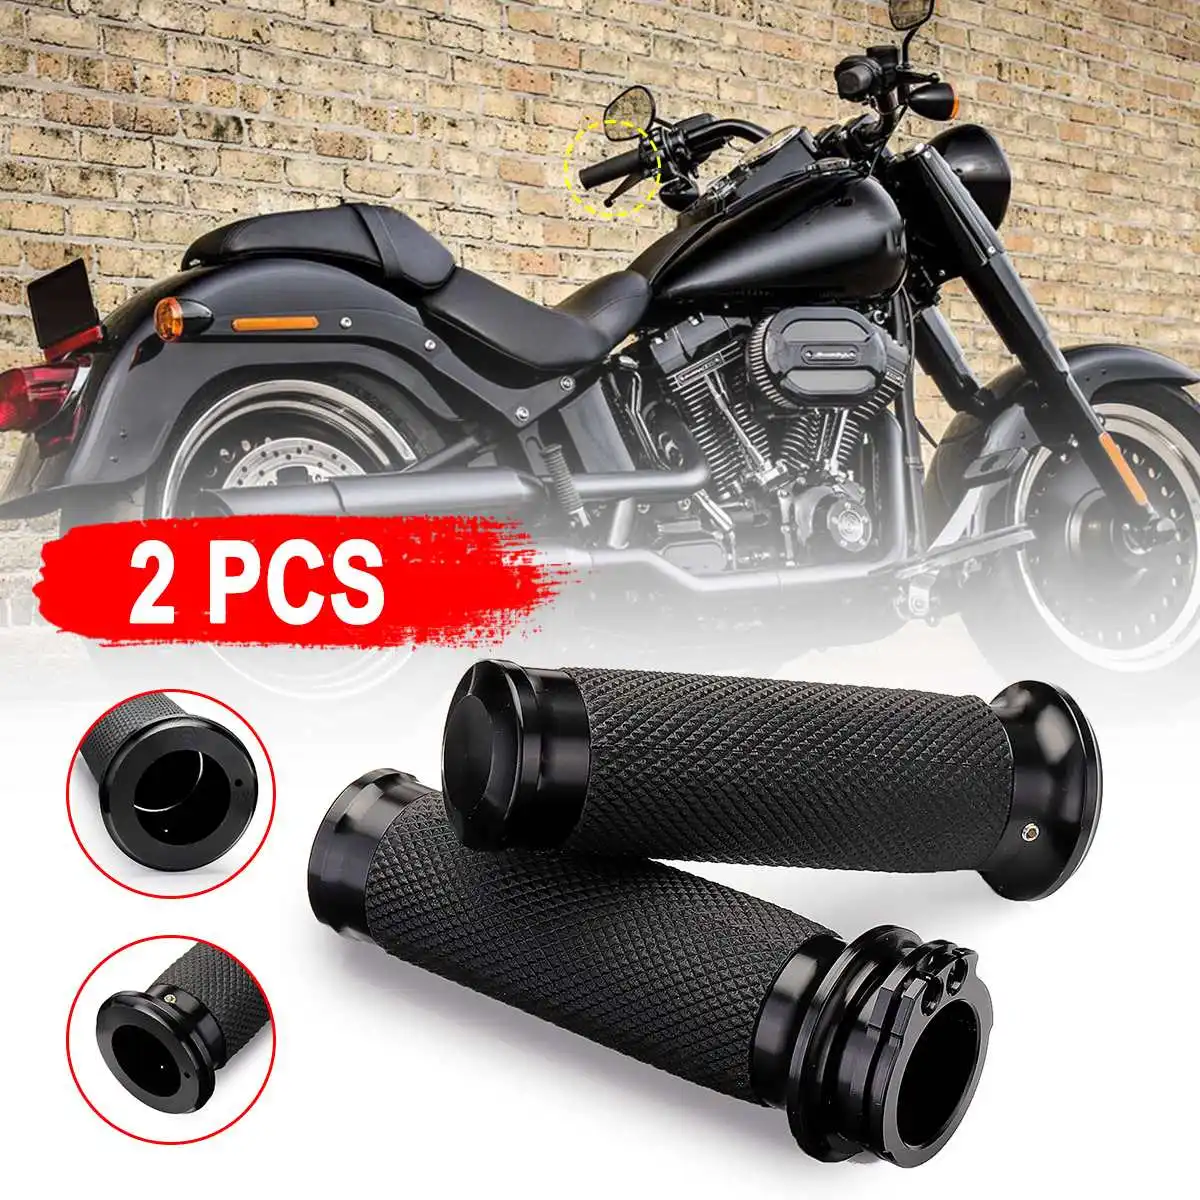 

2Pcs Black 1" (25mm) Soft Aluminum and Rubber Hand Grips Handle bar For Harley Davidson Touring Sportster XL883 Dyna